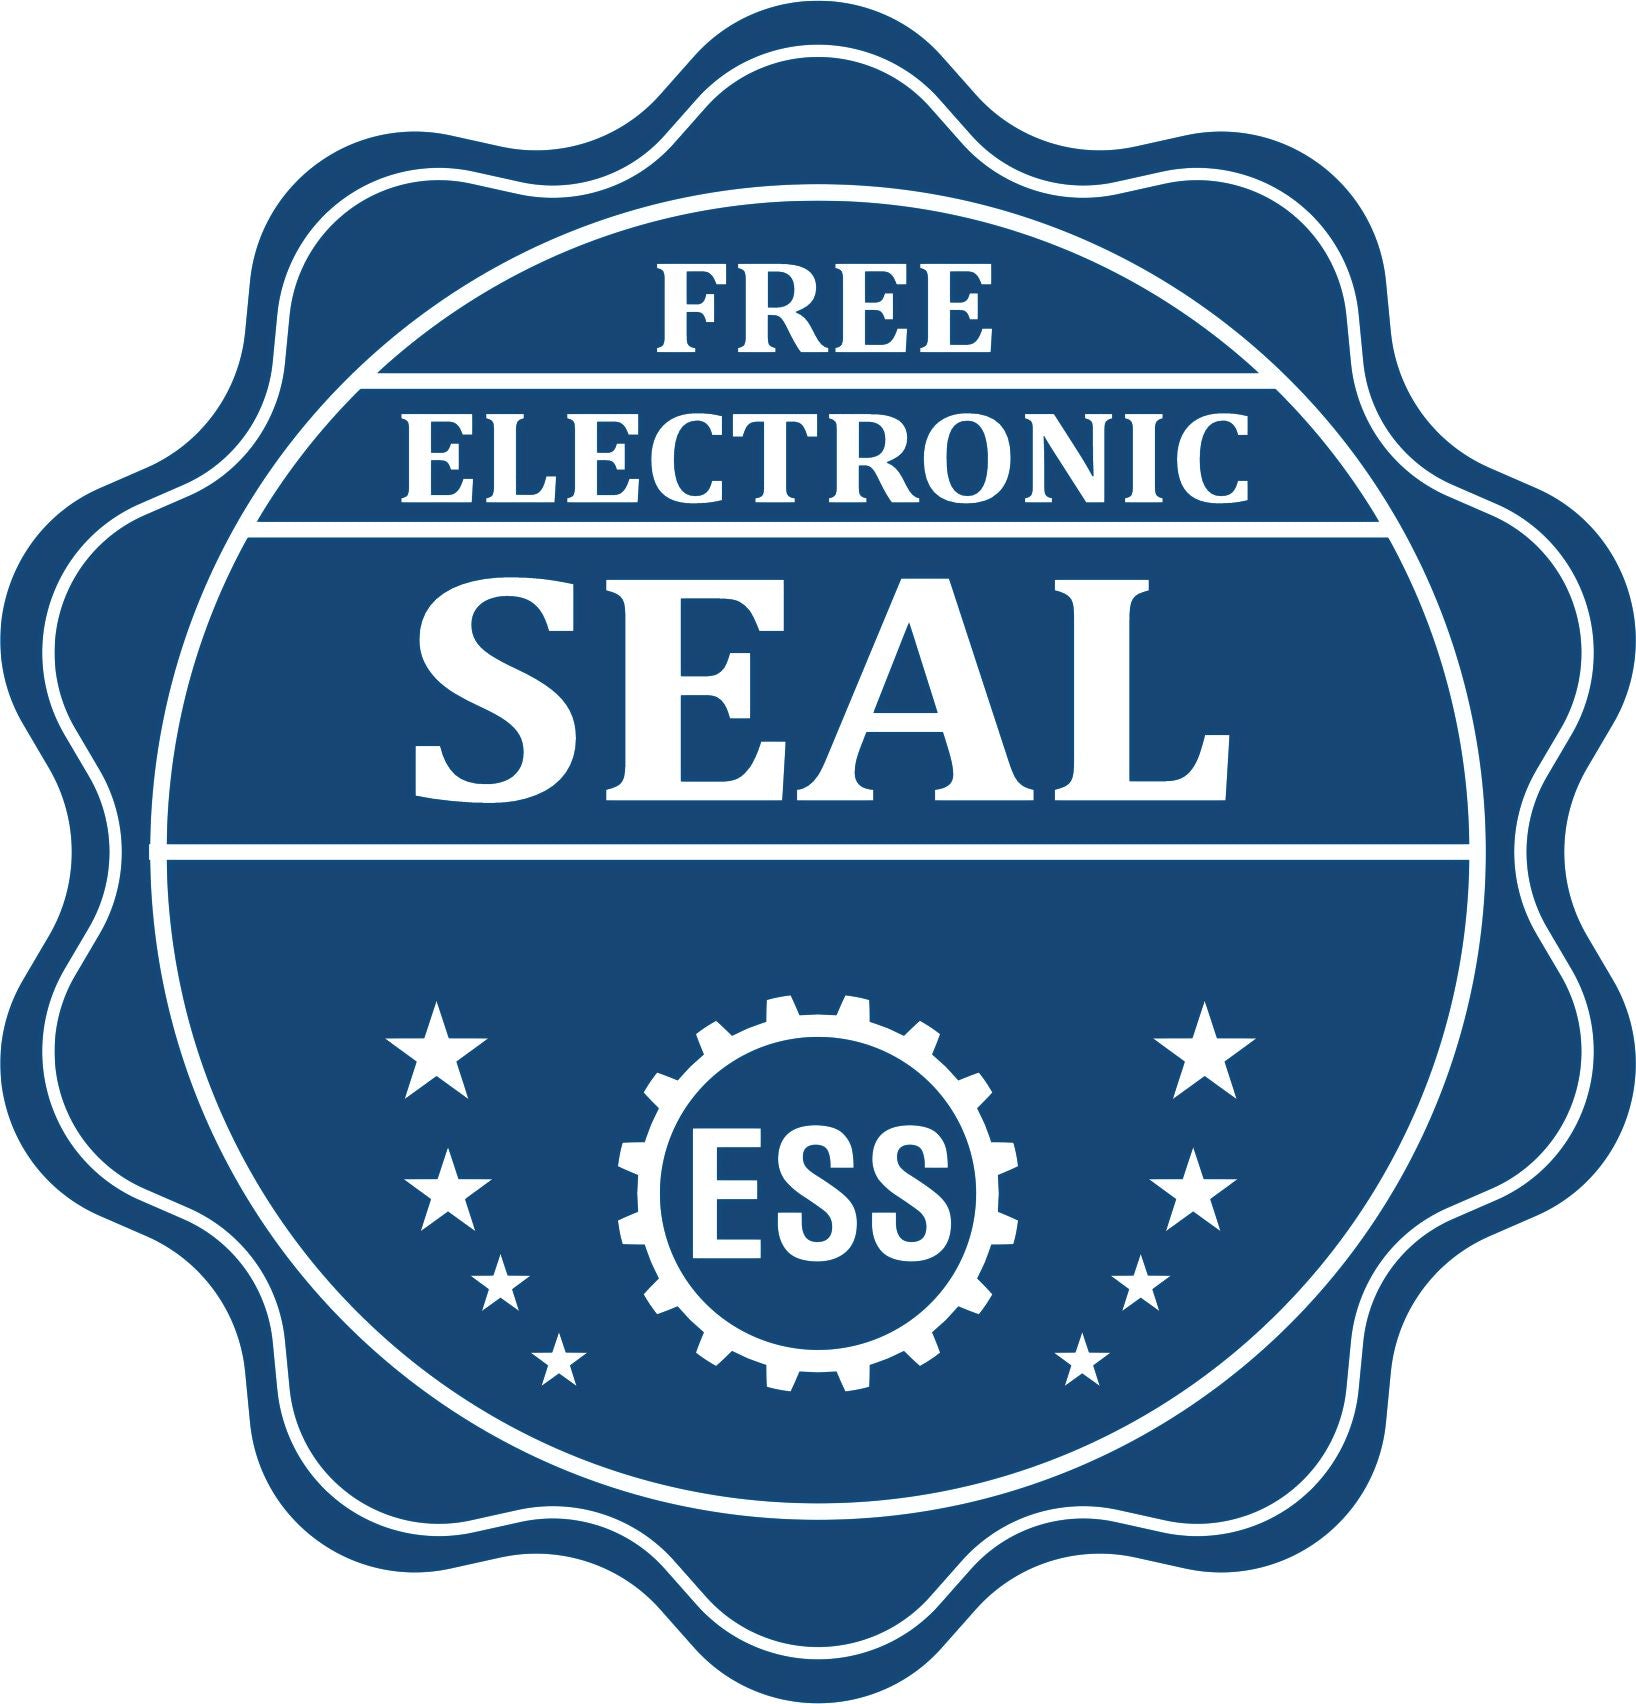 A badge showing a free electronic seal for the Self-Inking Alaska Geologist Stamp with stars and the ESS gear on the emblem.